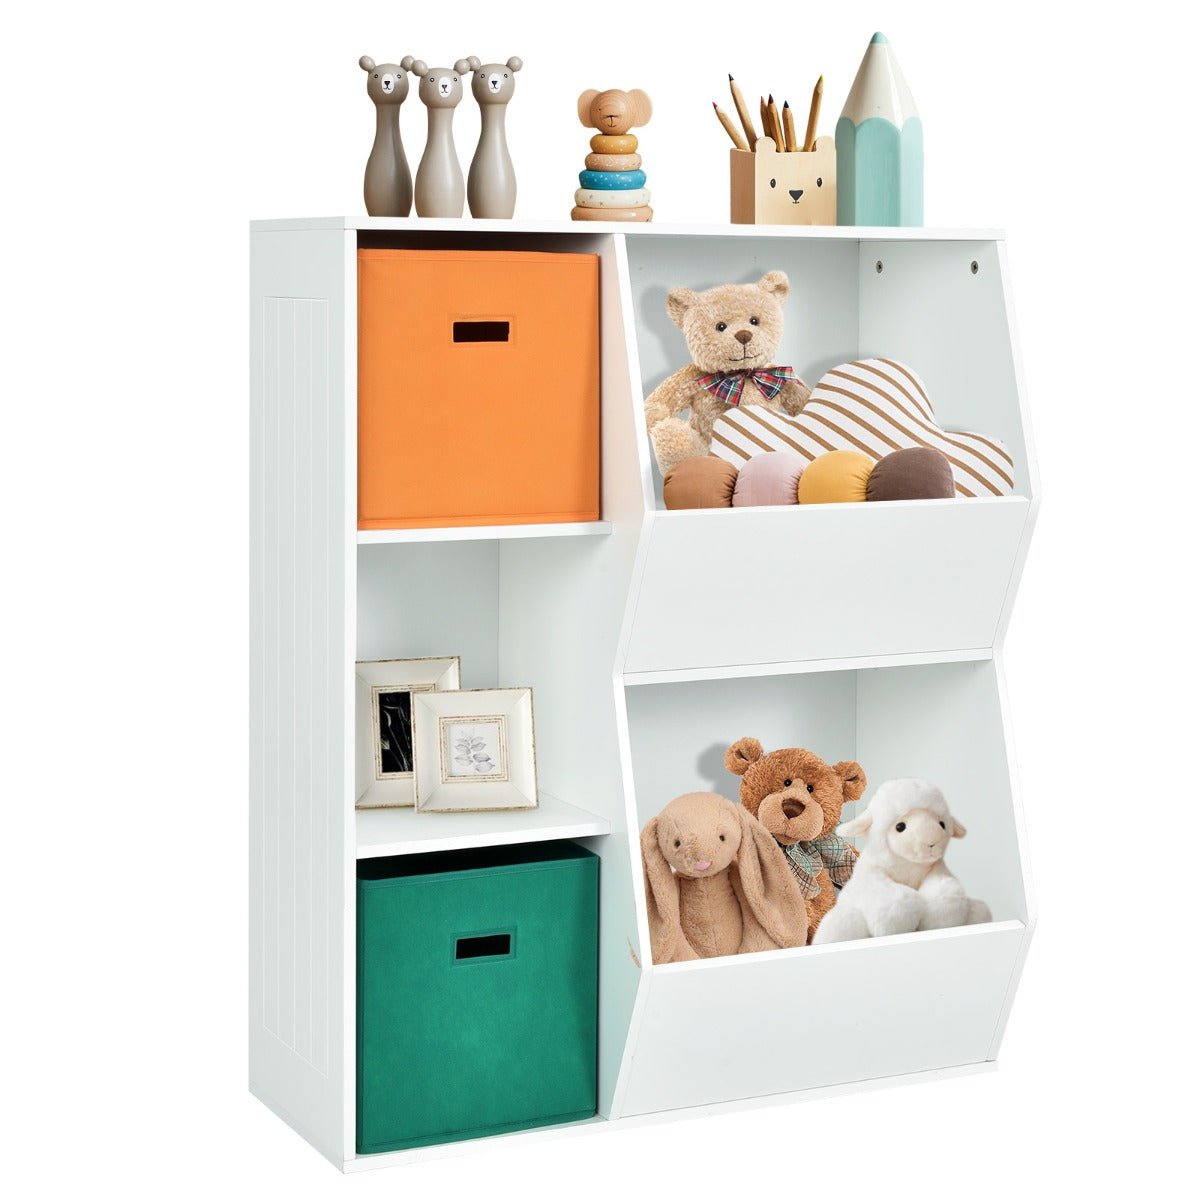 Organize Kids Room - Toy Storage with 2 Baskets for Easy Access